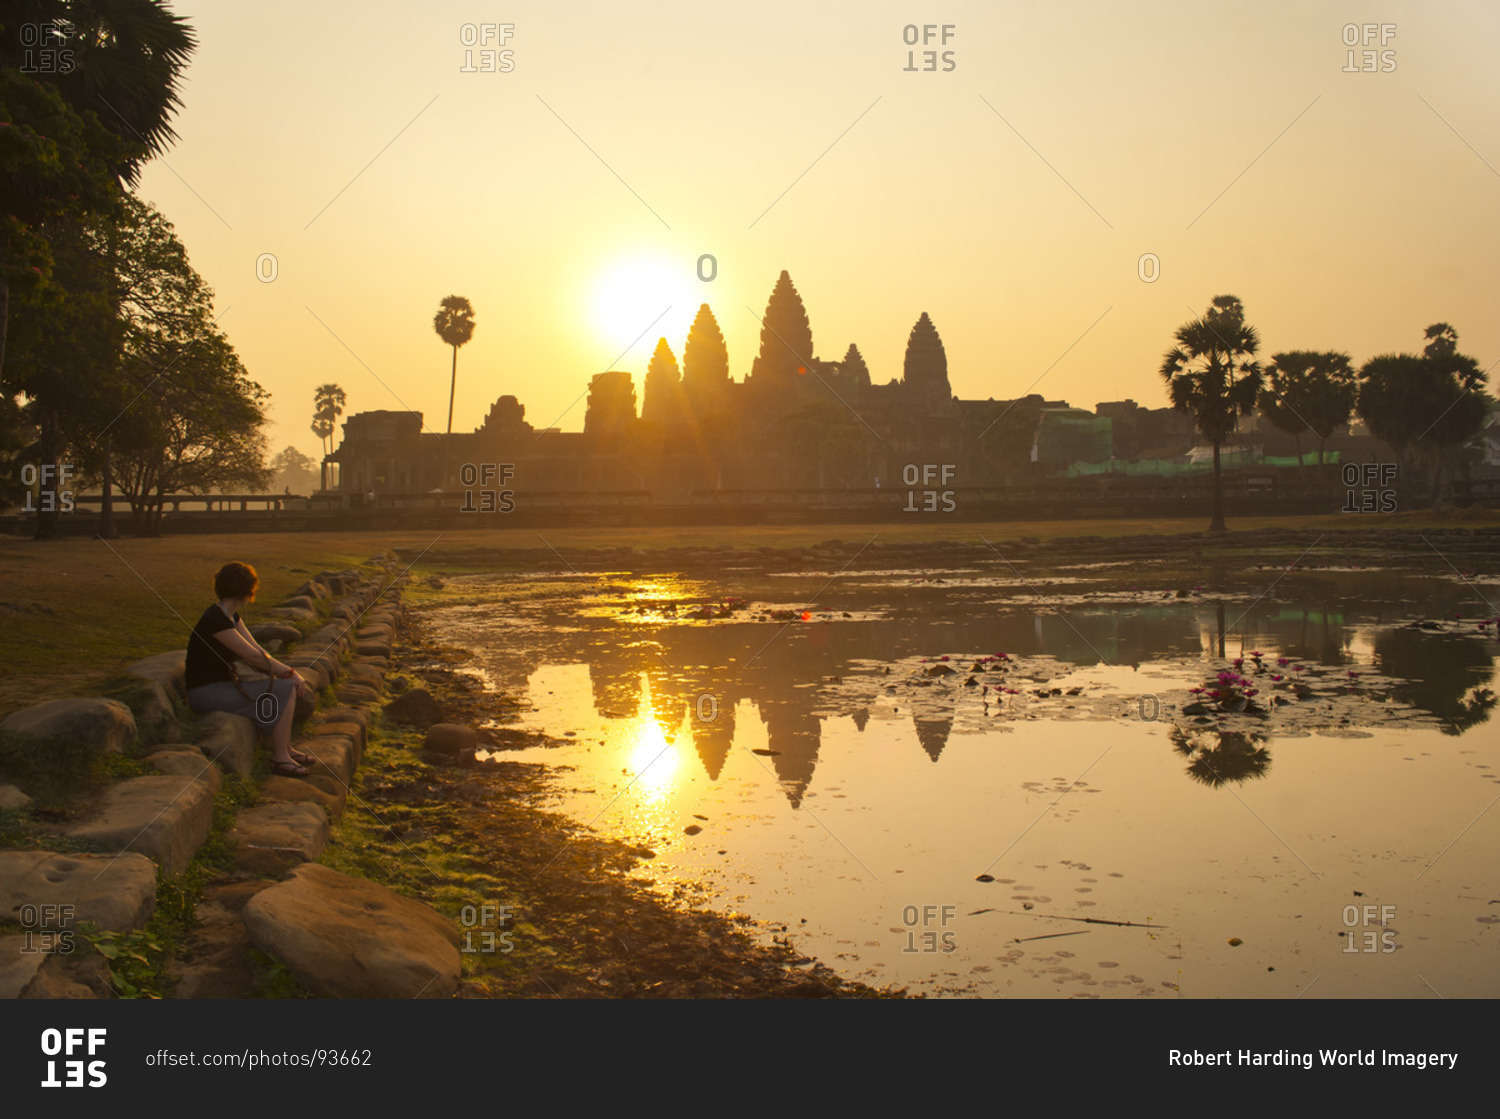 Tourist watching sunrise at Angkor Wat Temple, Angkor Temples, UNESCO World Heritage Site, Siem Reap Province, Cambodia, Indochina, Southeast Asia, Asia